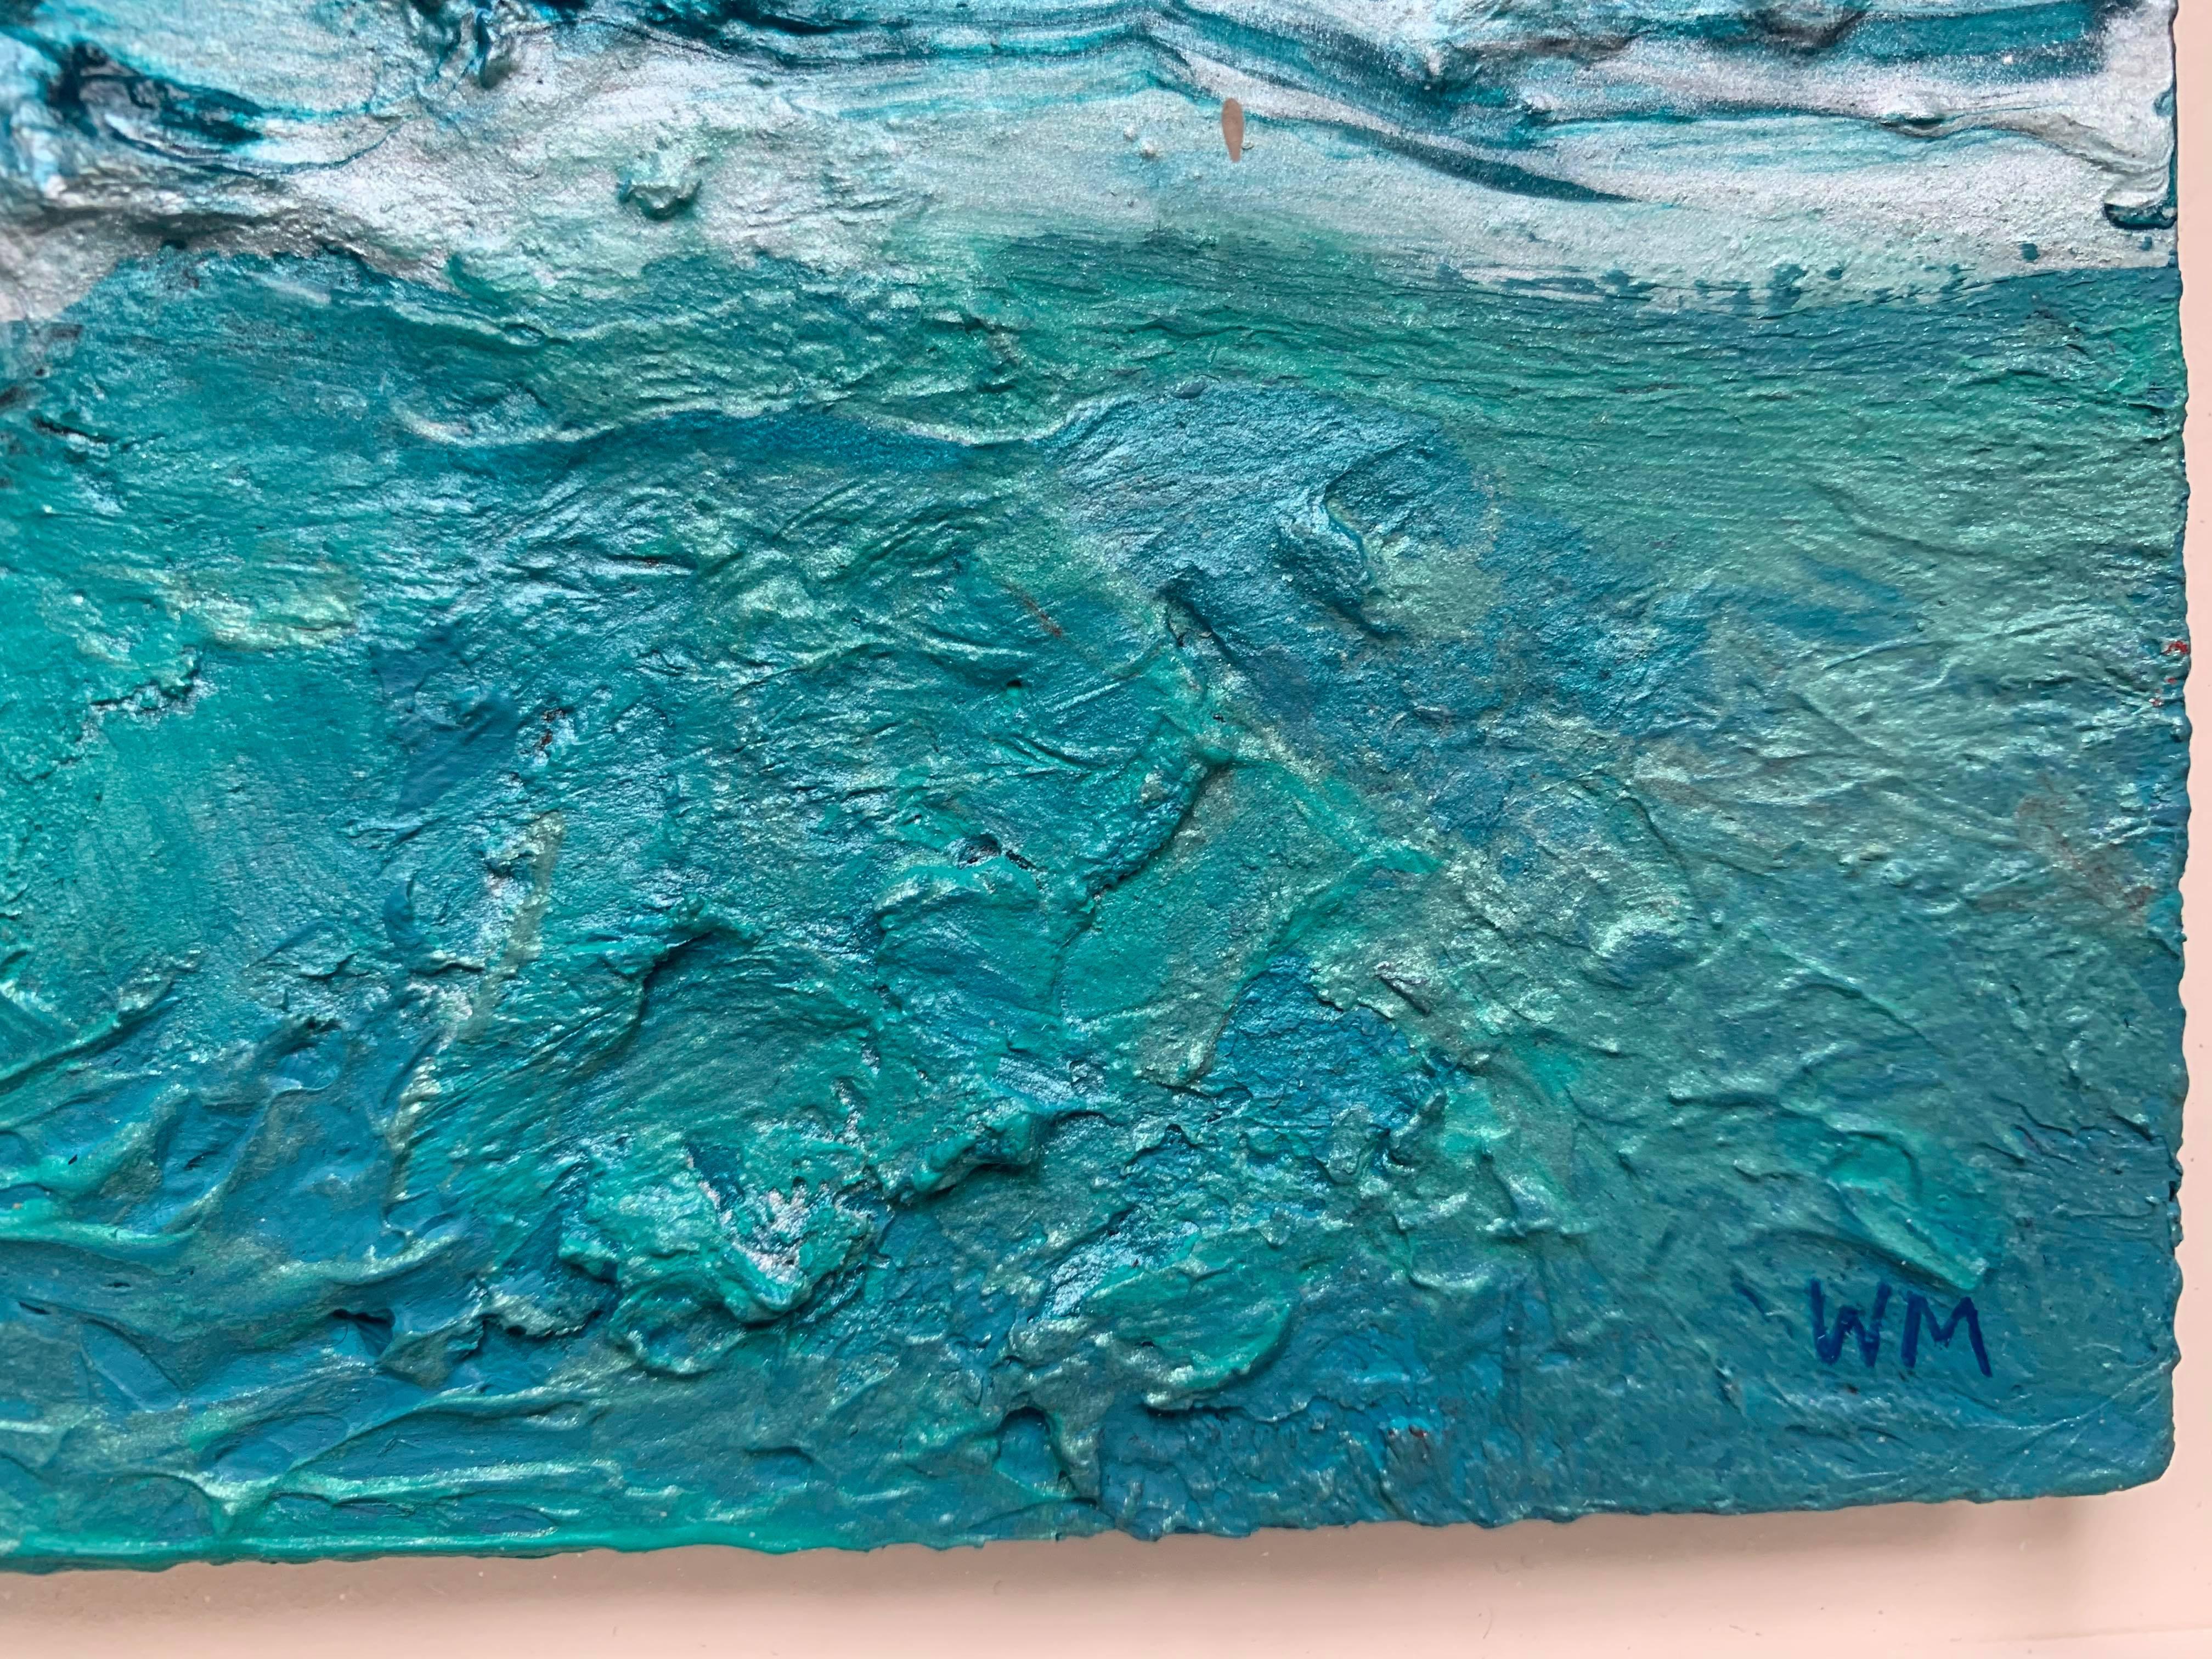 This acrylic on paper painting presents a lovely seascape. The tranquil violet of the sky complements the deep turquoises of the ocean's water. An impasto technique is used to give the water a sense of movement, with waves crashing on each other. 